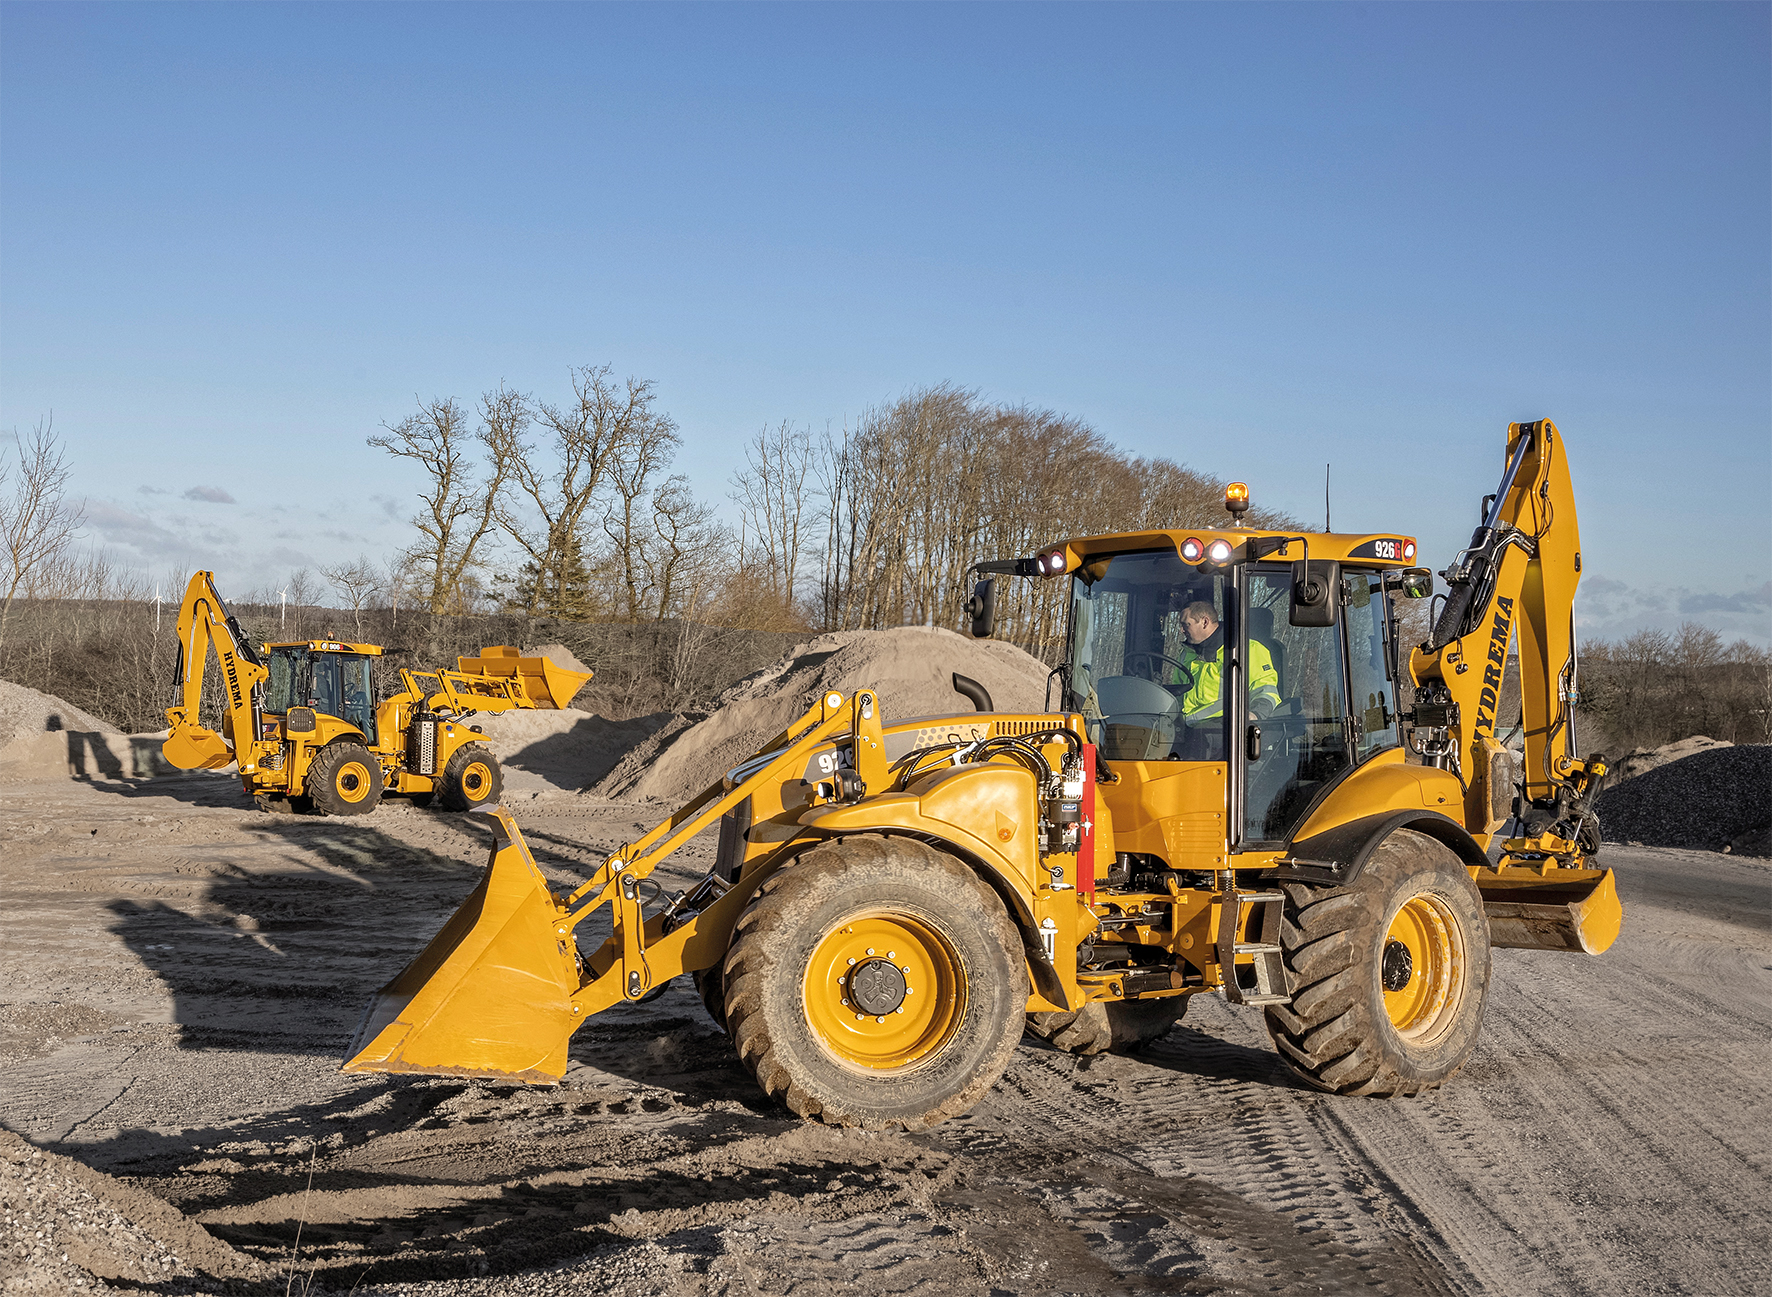 Hydrema launches new series of backhoe loaders with Cummins Stage 5 engines which fully meet the latest emission requirements.